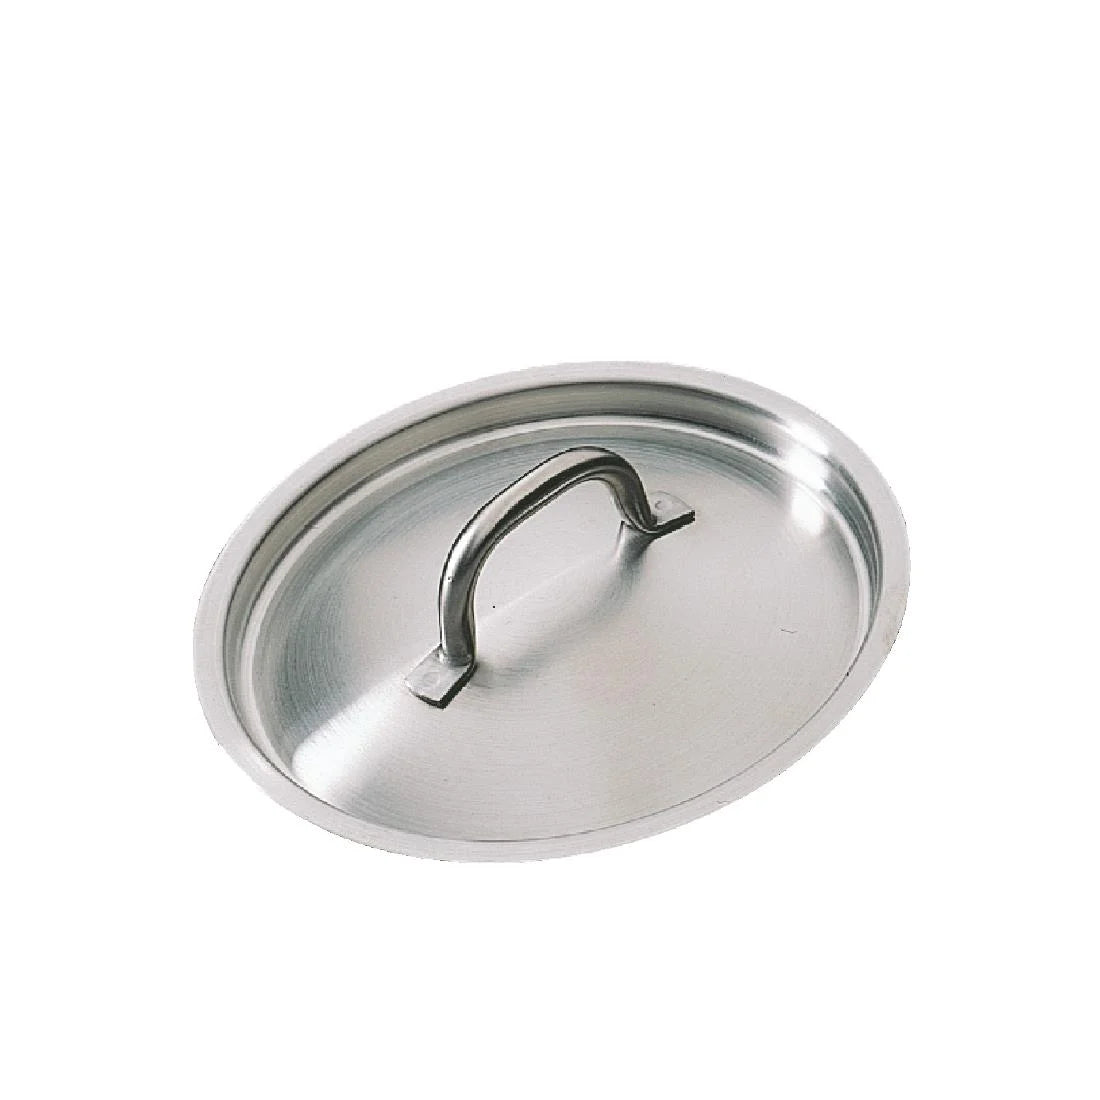 Bourgeat Stainless Steel Saucepan Lid 320mm JD Catering Equipment Solutions Ltd